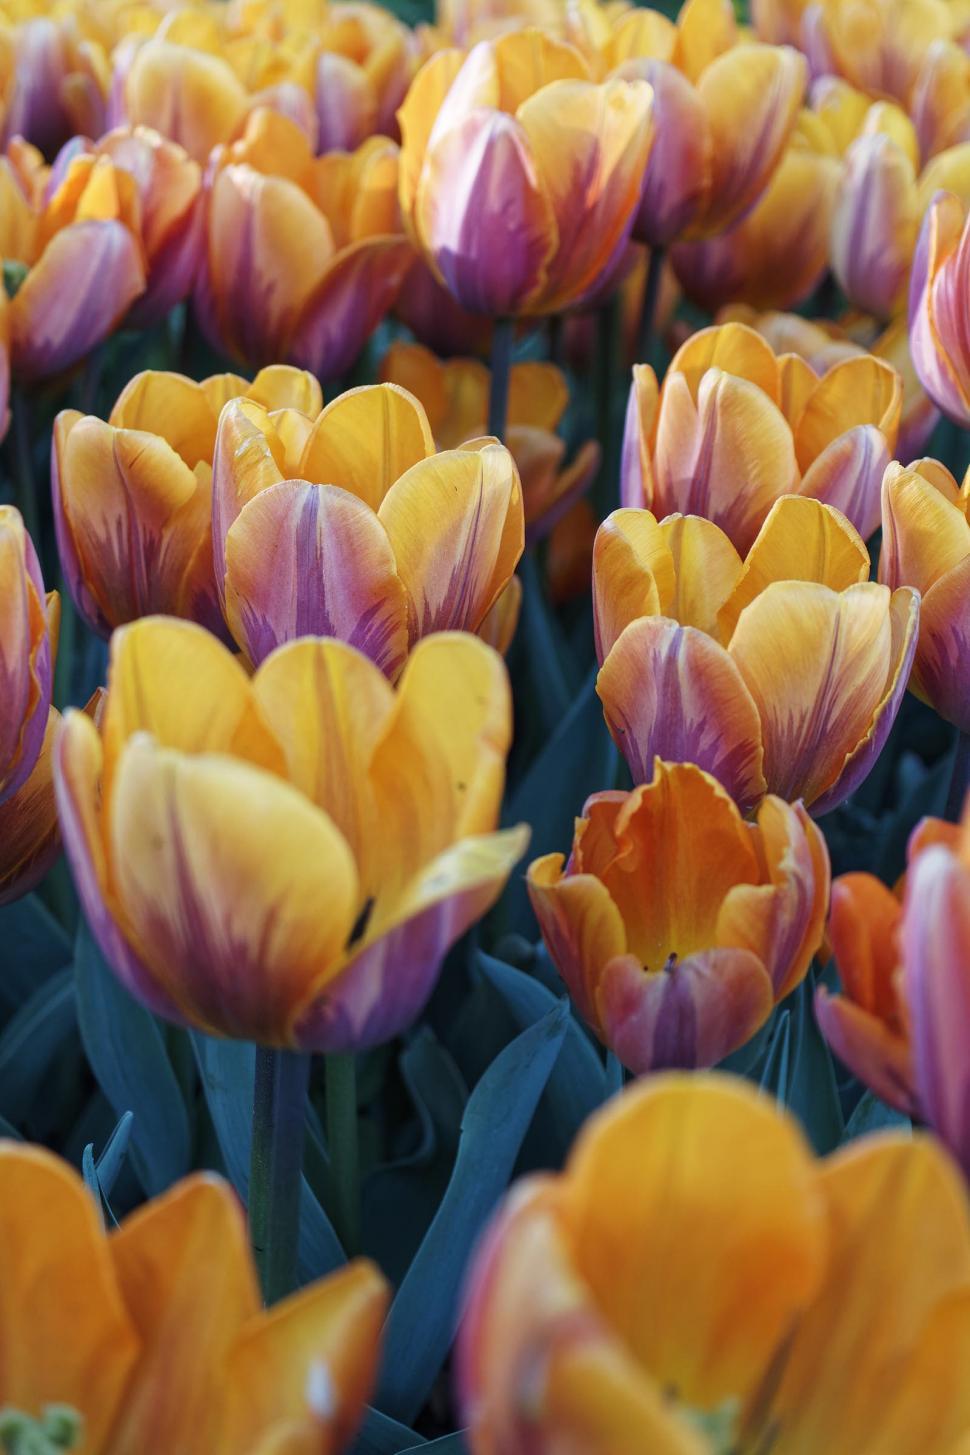 Free Image of Yellow and purple tulips 